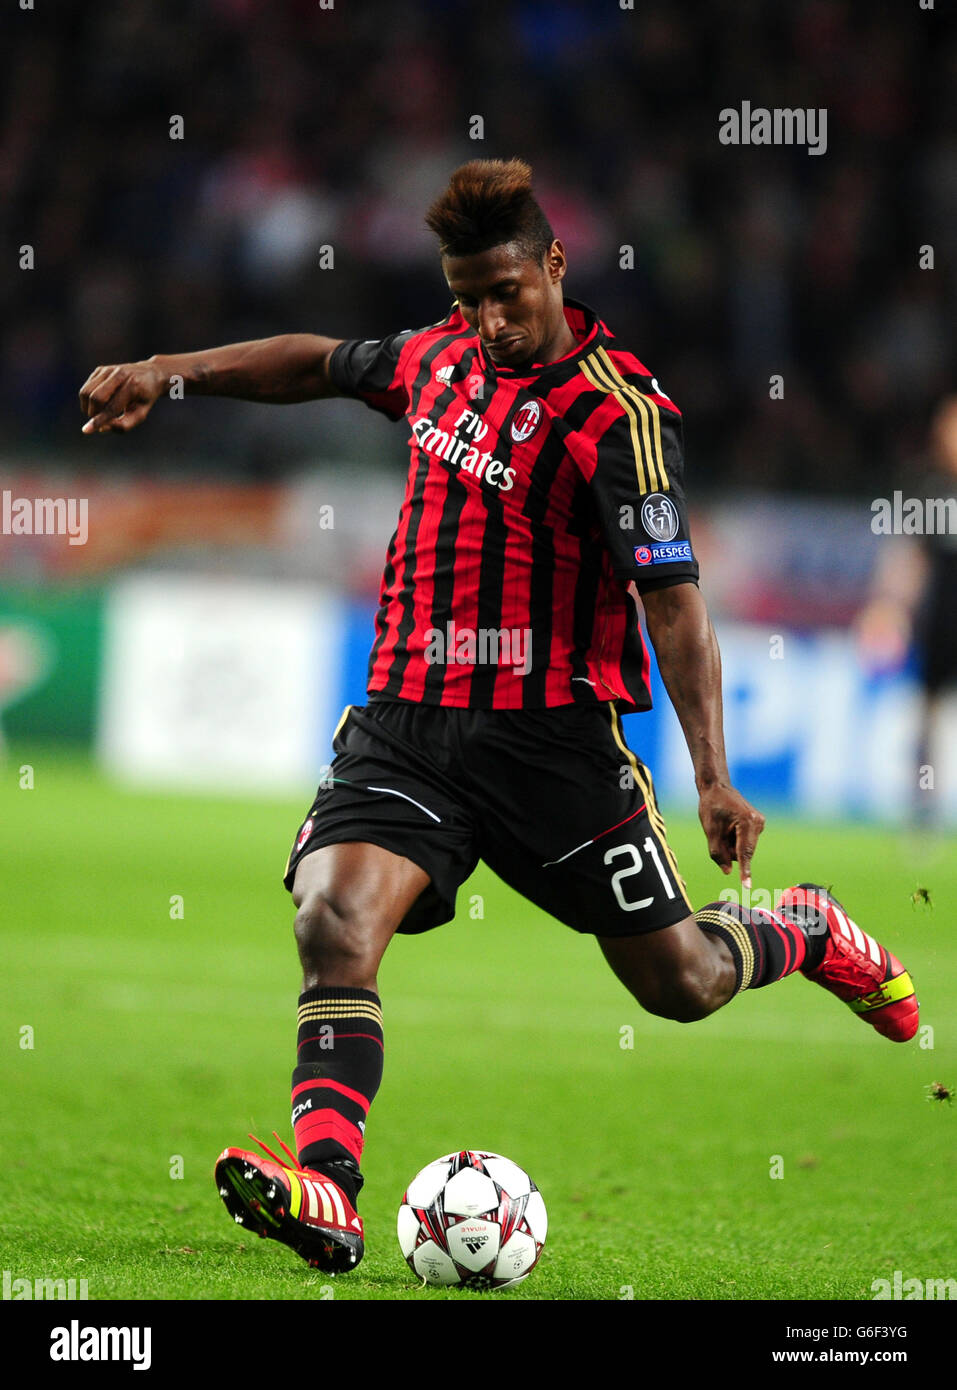 Soccer - UEFA Champions League - Group G - Ajax Amsterdam v AC Milan - Amsterdam ArenA. Kevin Constant, AC Milan Stock Photo